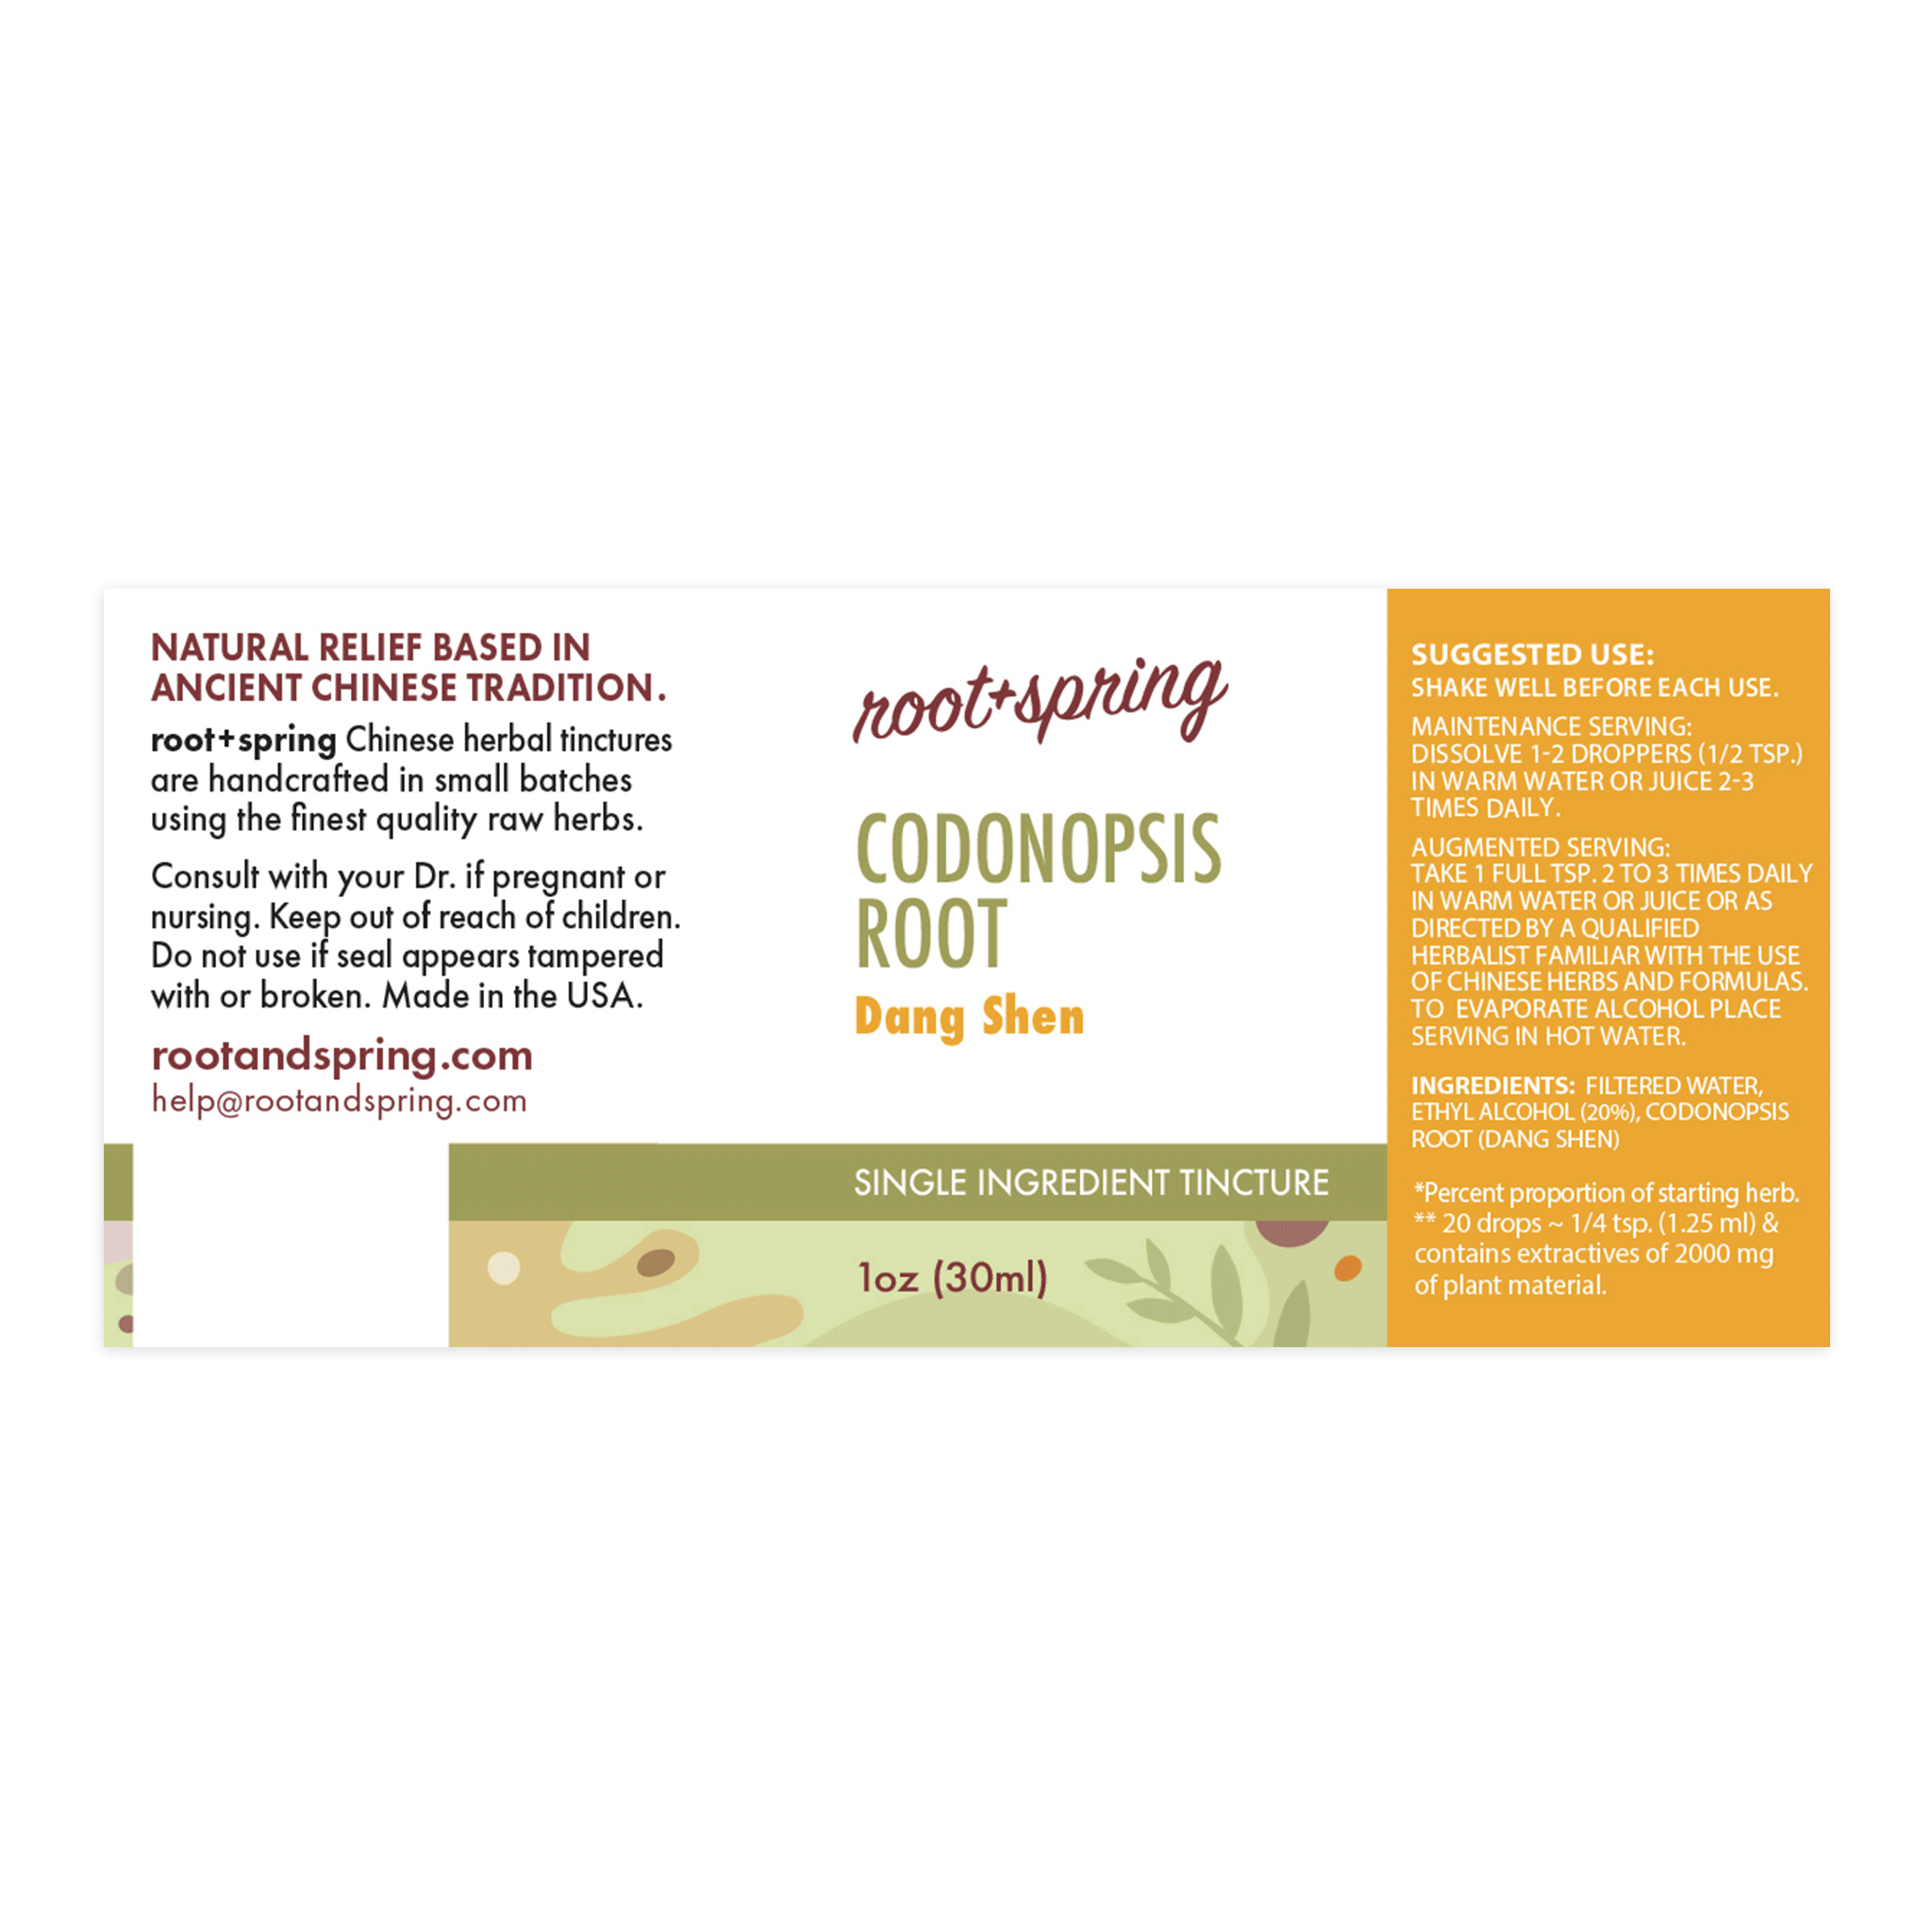 Label for Codonopsis Root, or Dang Shen, Herbal Tincture, by root + spring